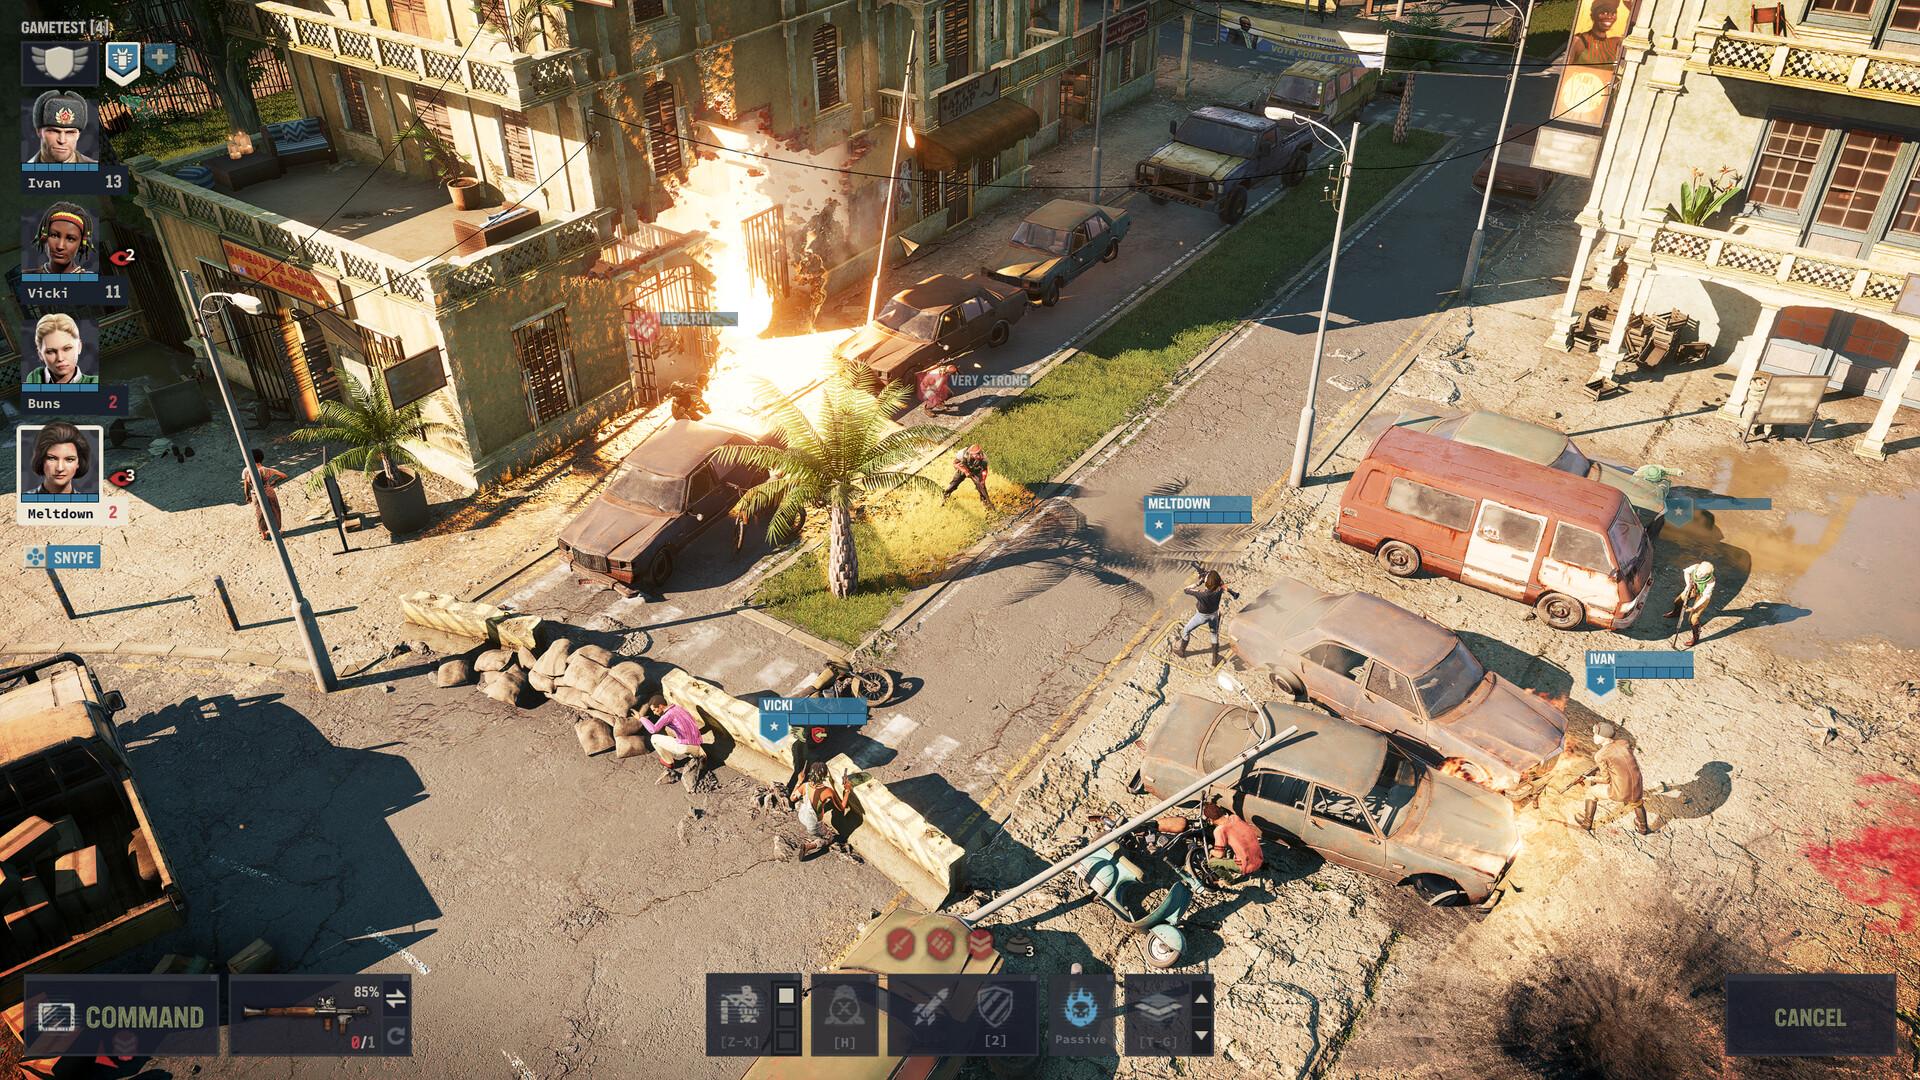 Screenshot №9 from game Jagged Alliance 3